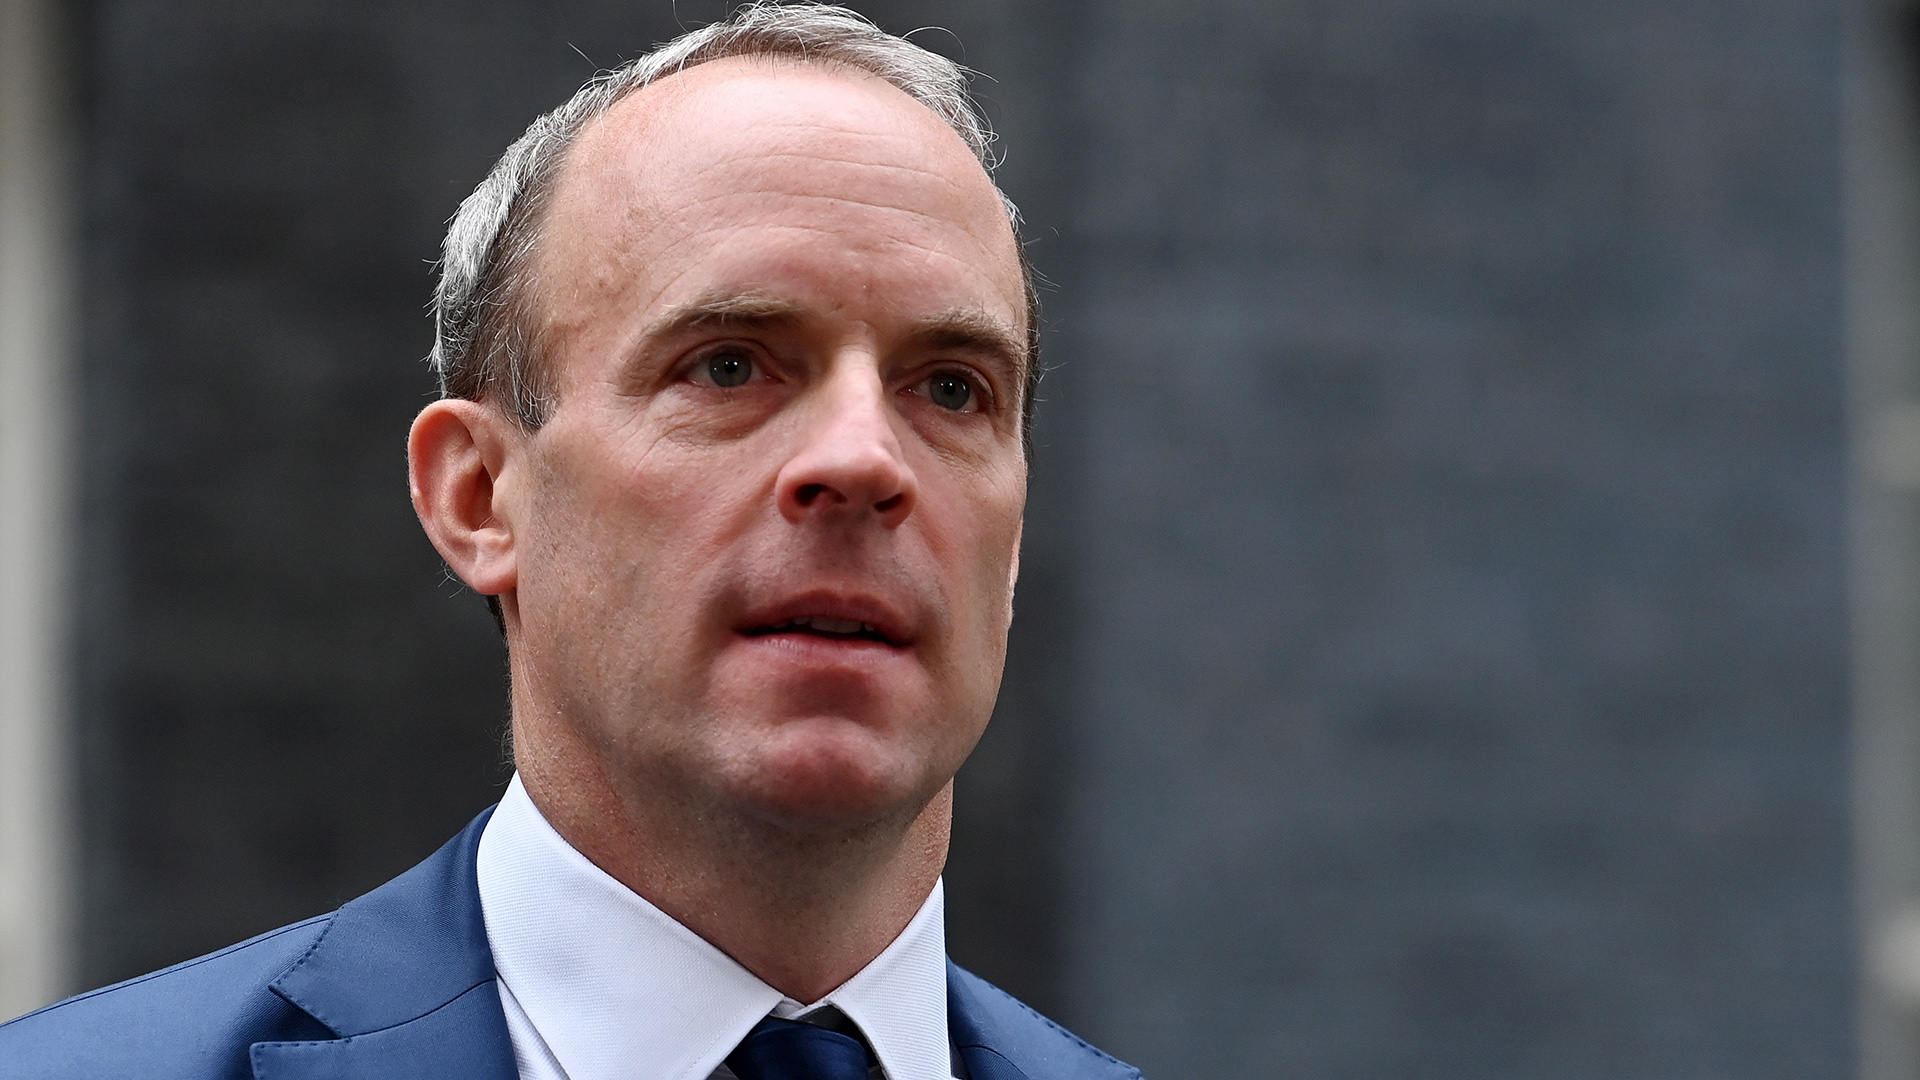 UK Government: Bullying Accusations Against Justice Minister Raab